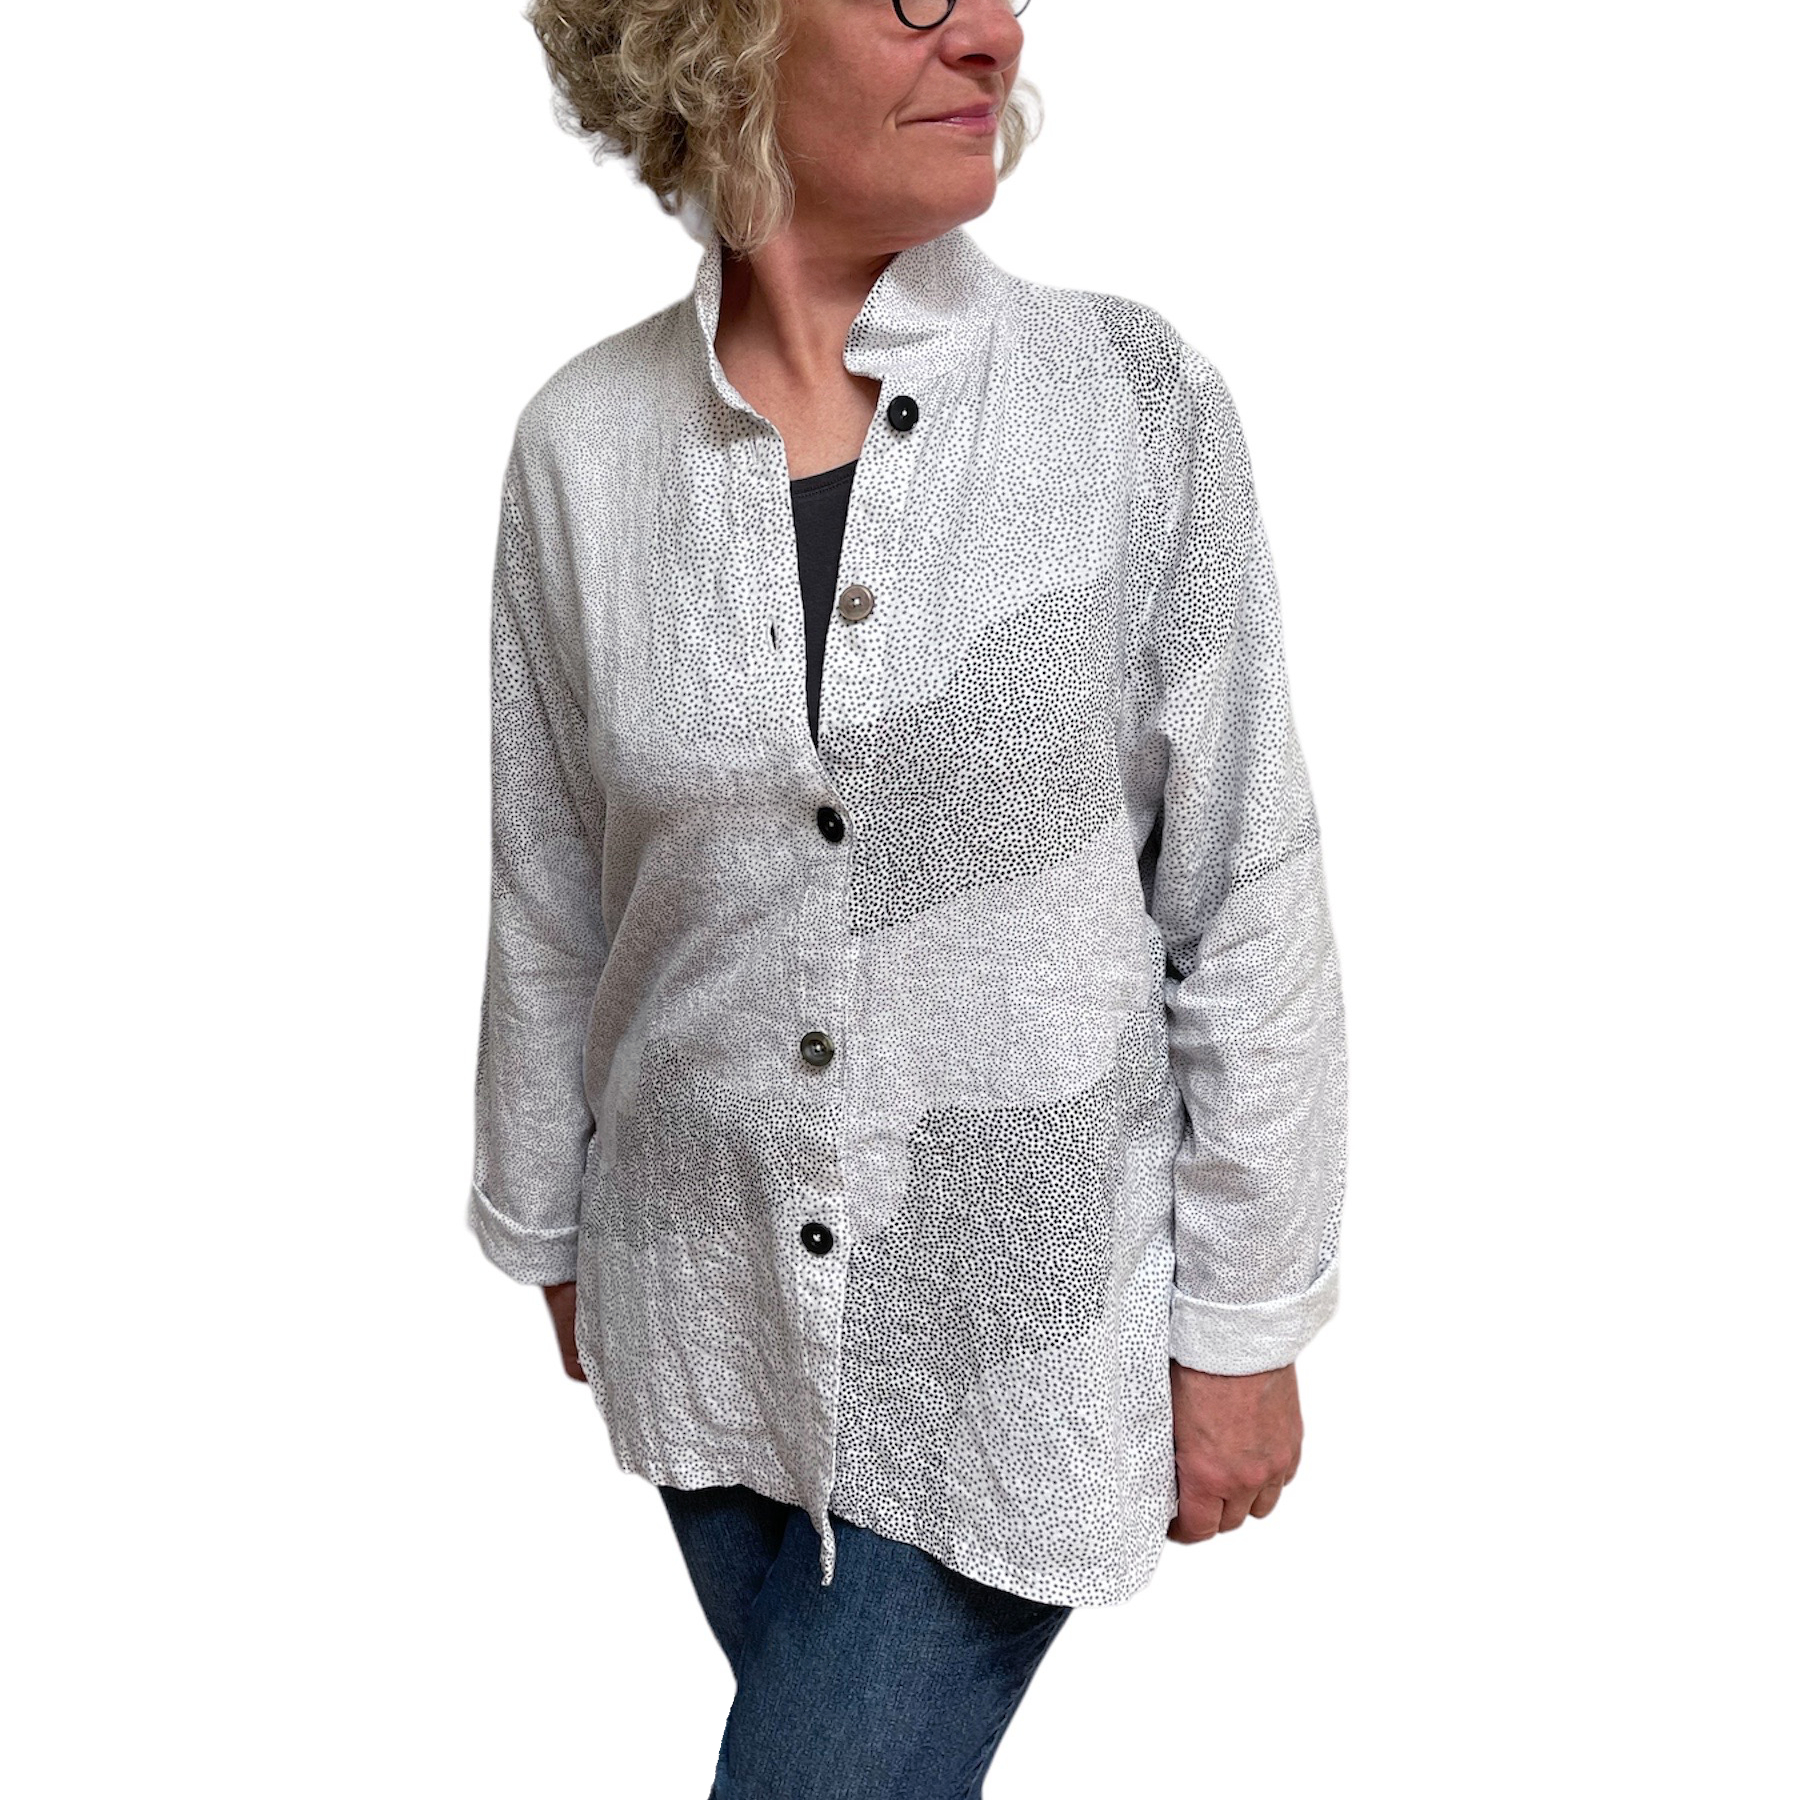 White with grey dots linen big shirt